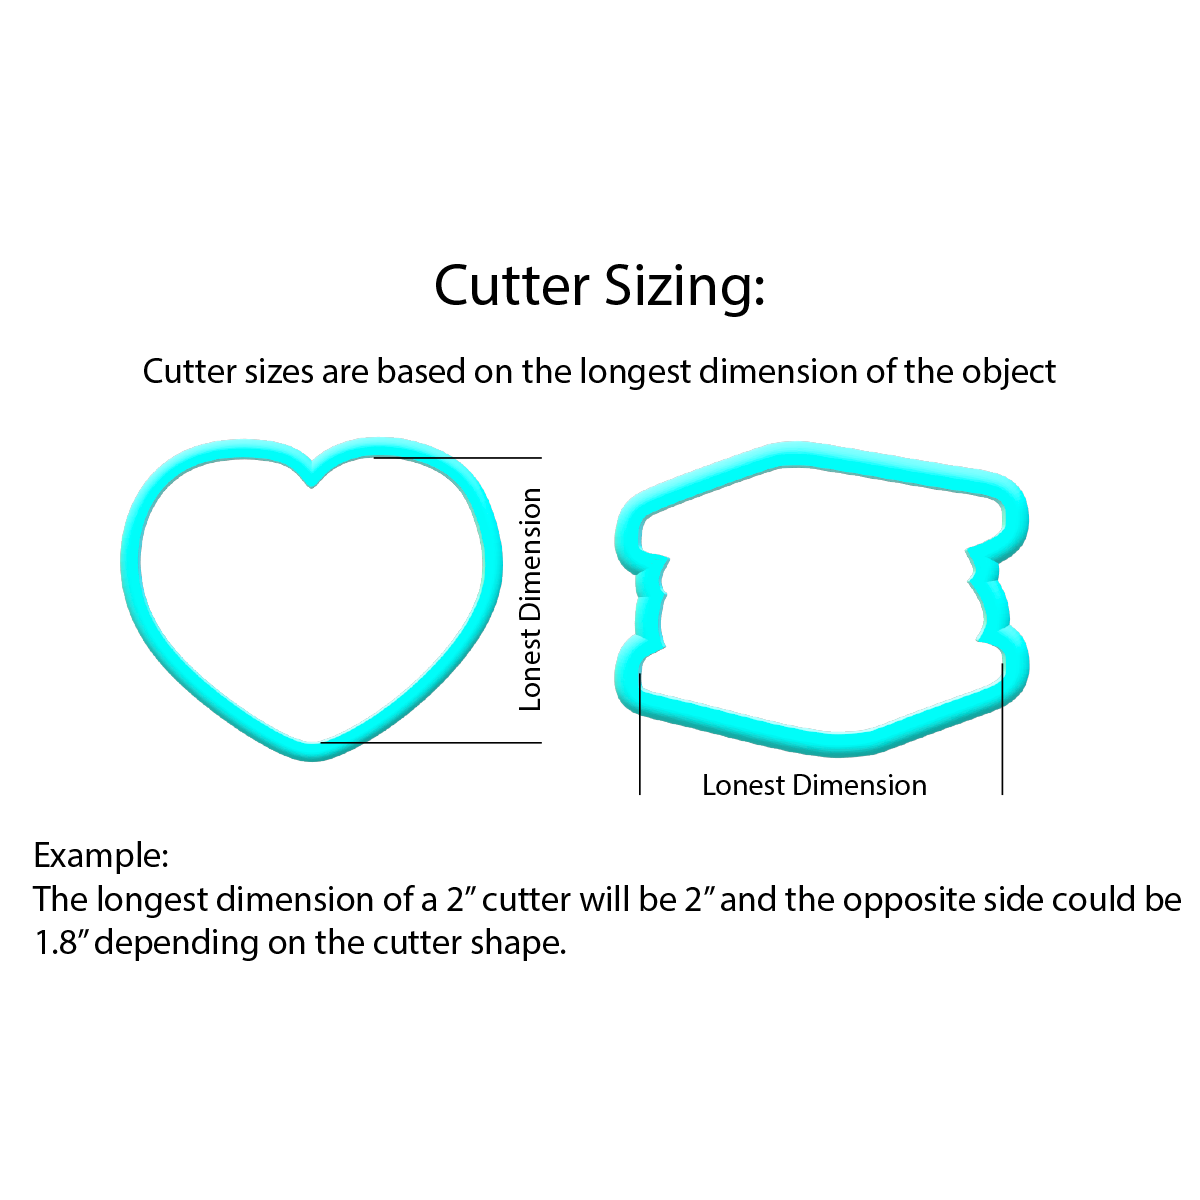 Heart Banner Cookie Cutters | Standard & Imprint Cutters Included | STL Files